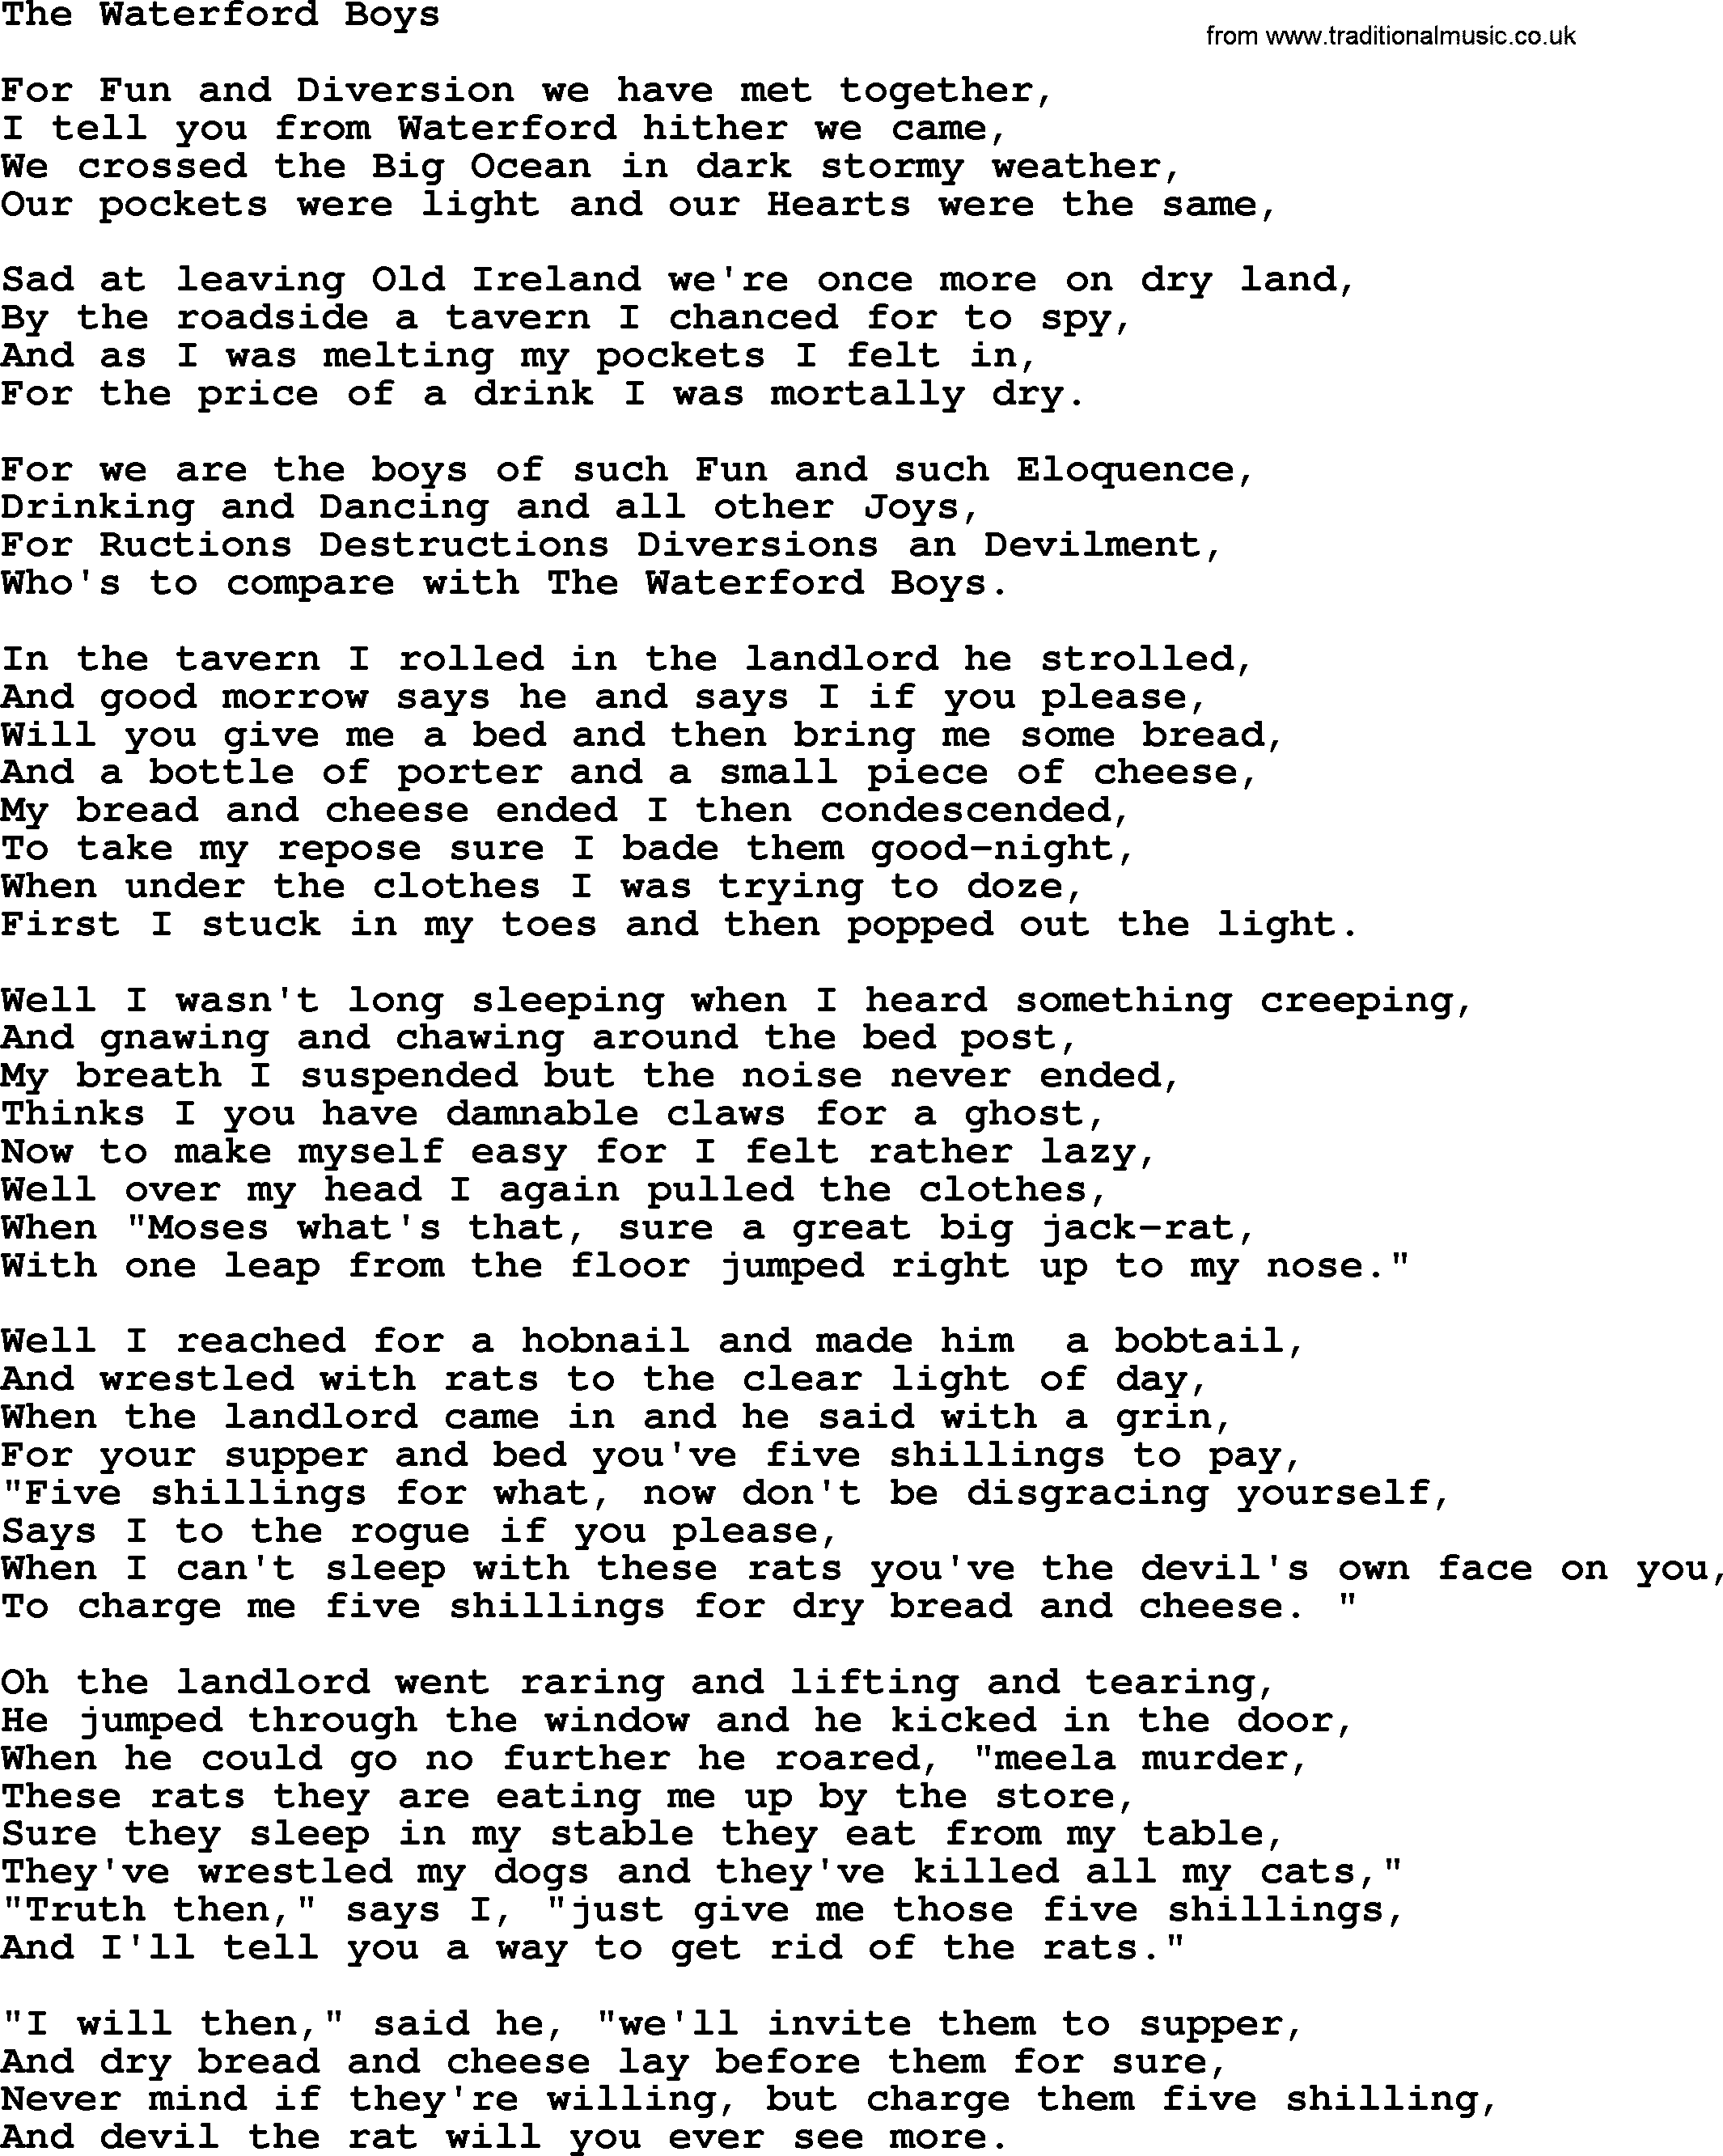 The Dubliners song: The Waterford Boys, lyrics